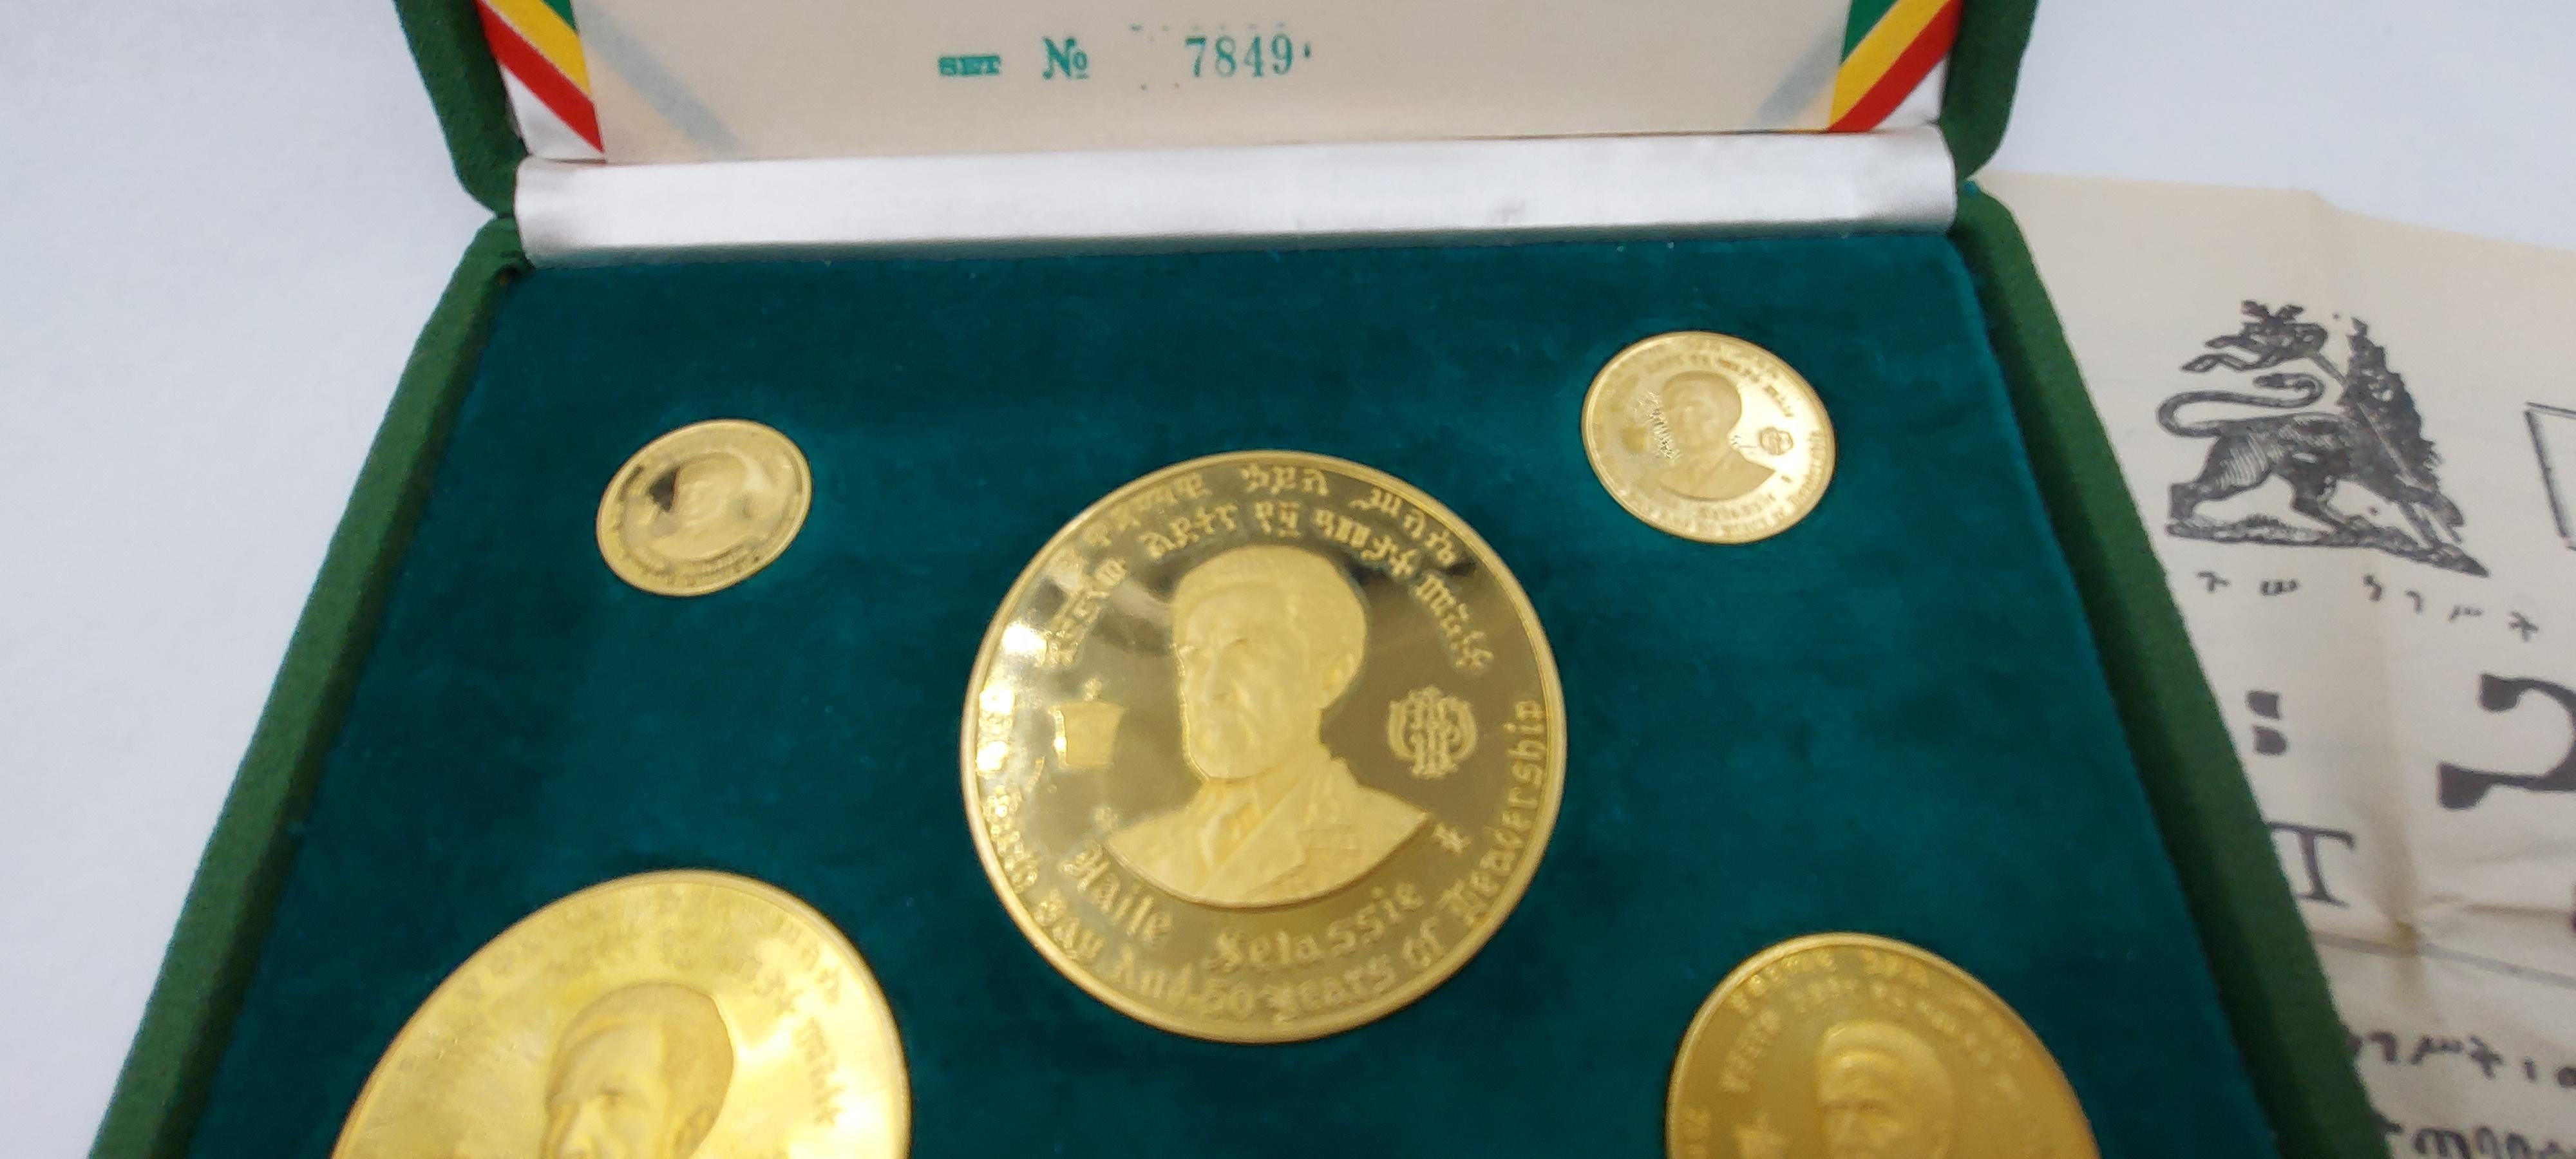 Magnificent 1966 Ethiopian Proof 22 carats yellow gold (152.80 grams) coin set. The biggest coin’s diameter is 
55 millimeters, the smallest coin’s diameter is 20 millimeters. Hallmarks. The gold coin set celebrates 
the 75th birthday and 50 years